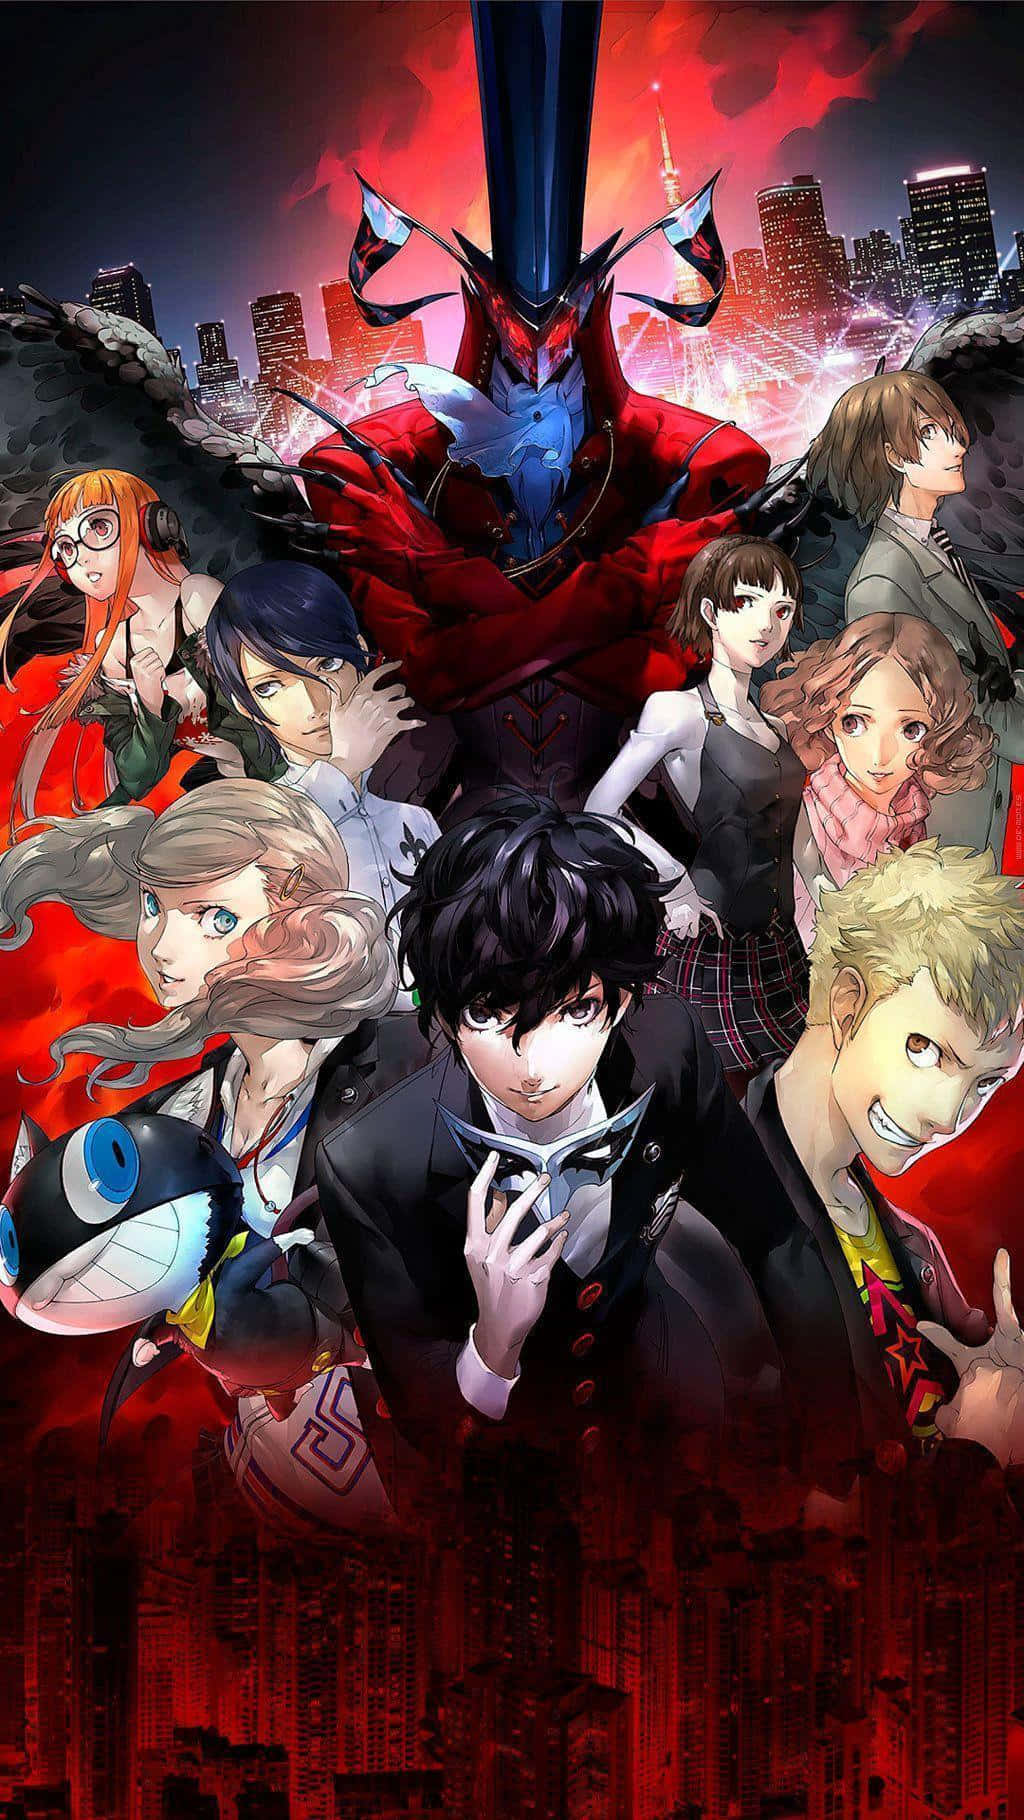 "Showcase your stylish side with the Persona 5 Iphone!" Wallpaper